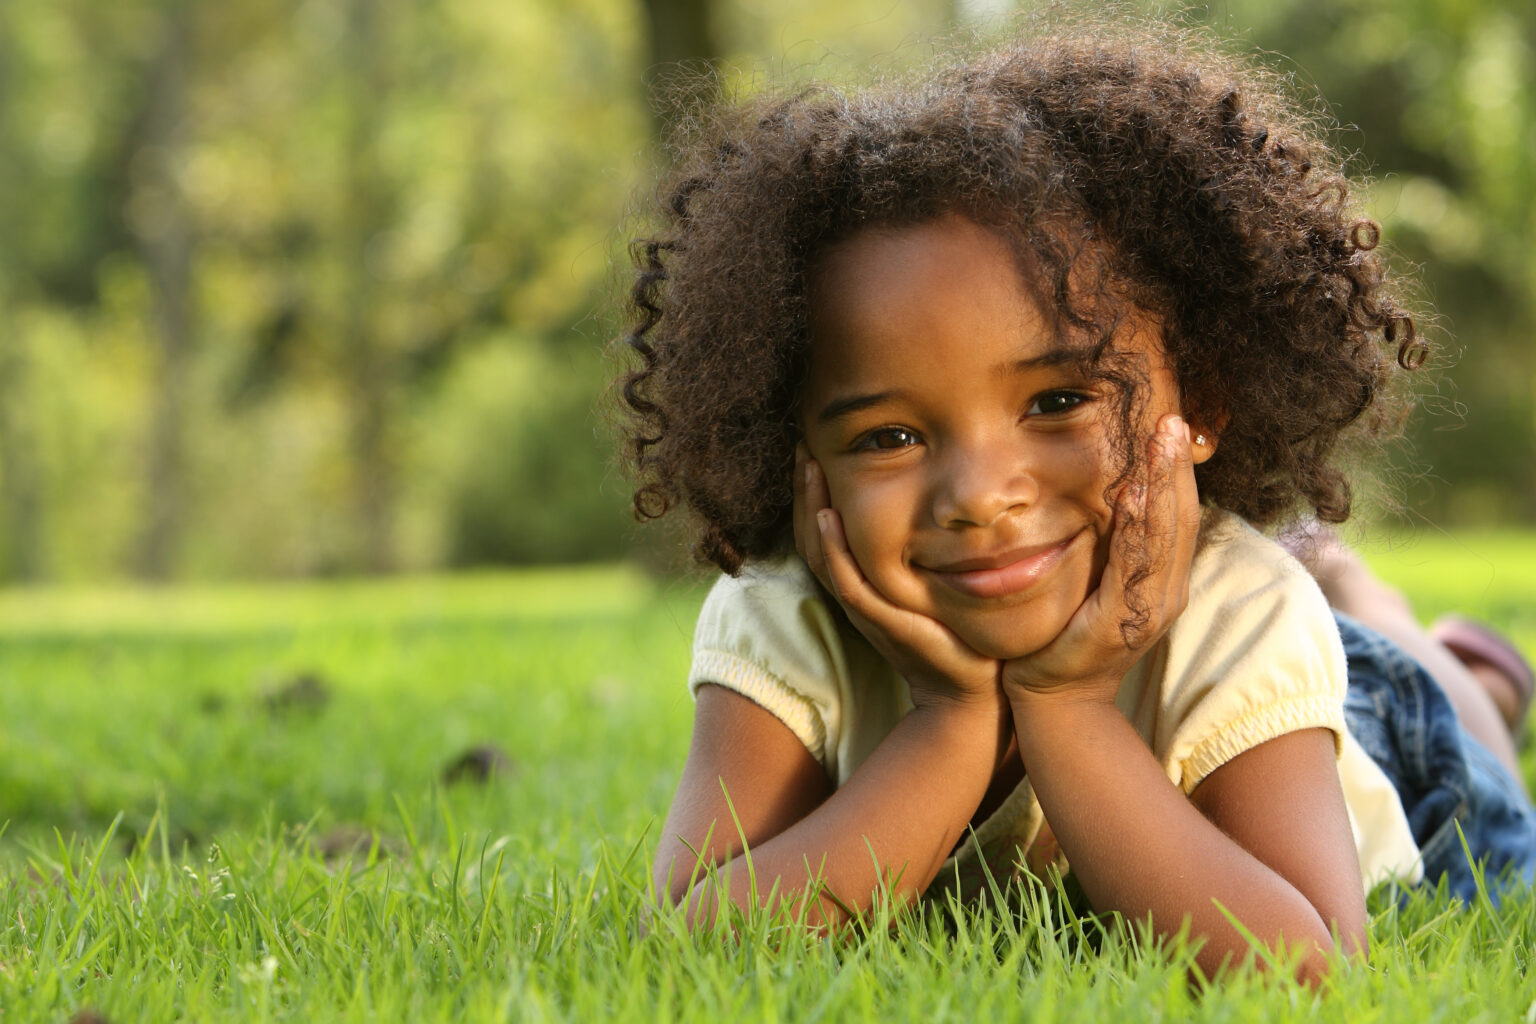 Smiling child lying in the grass.